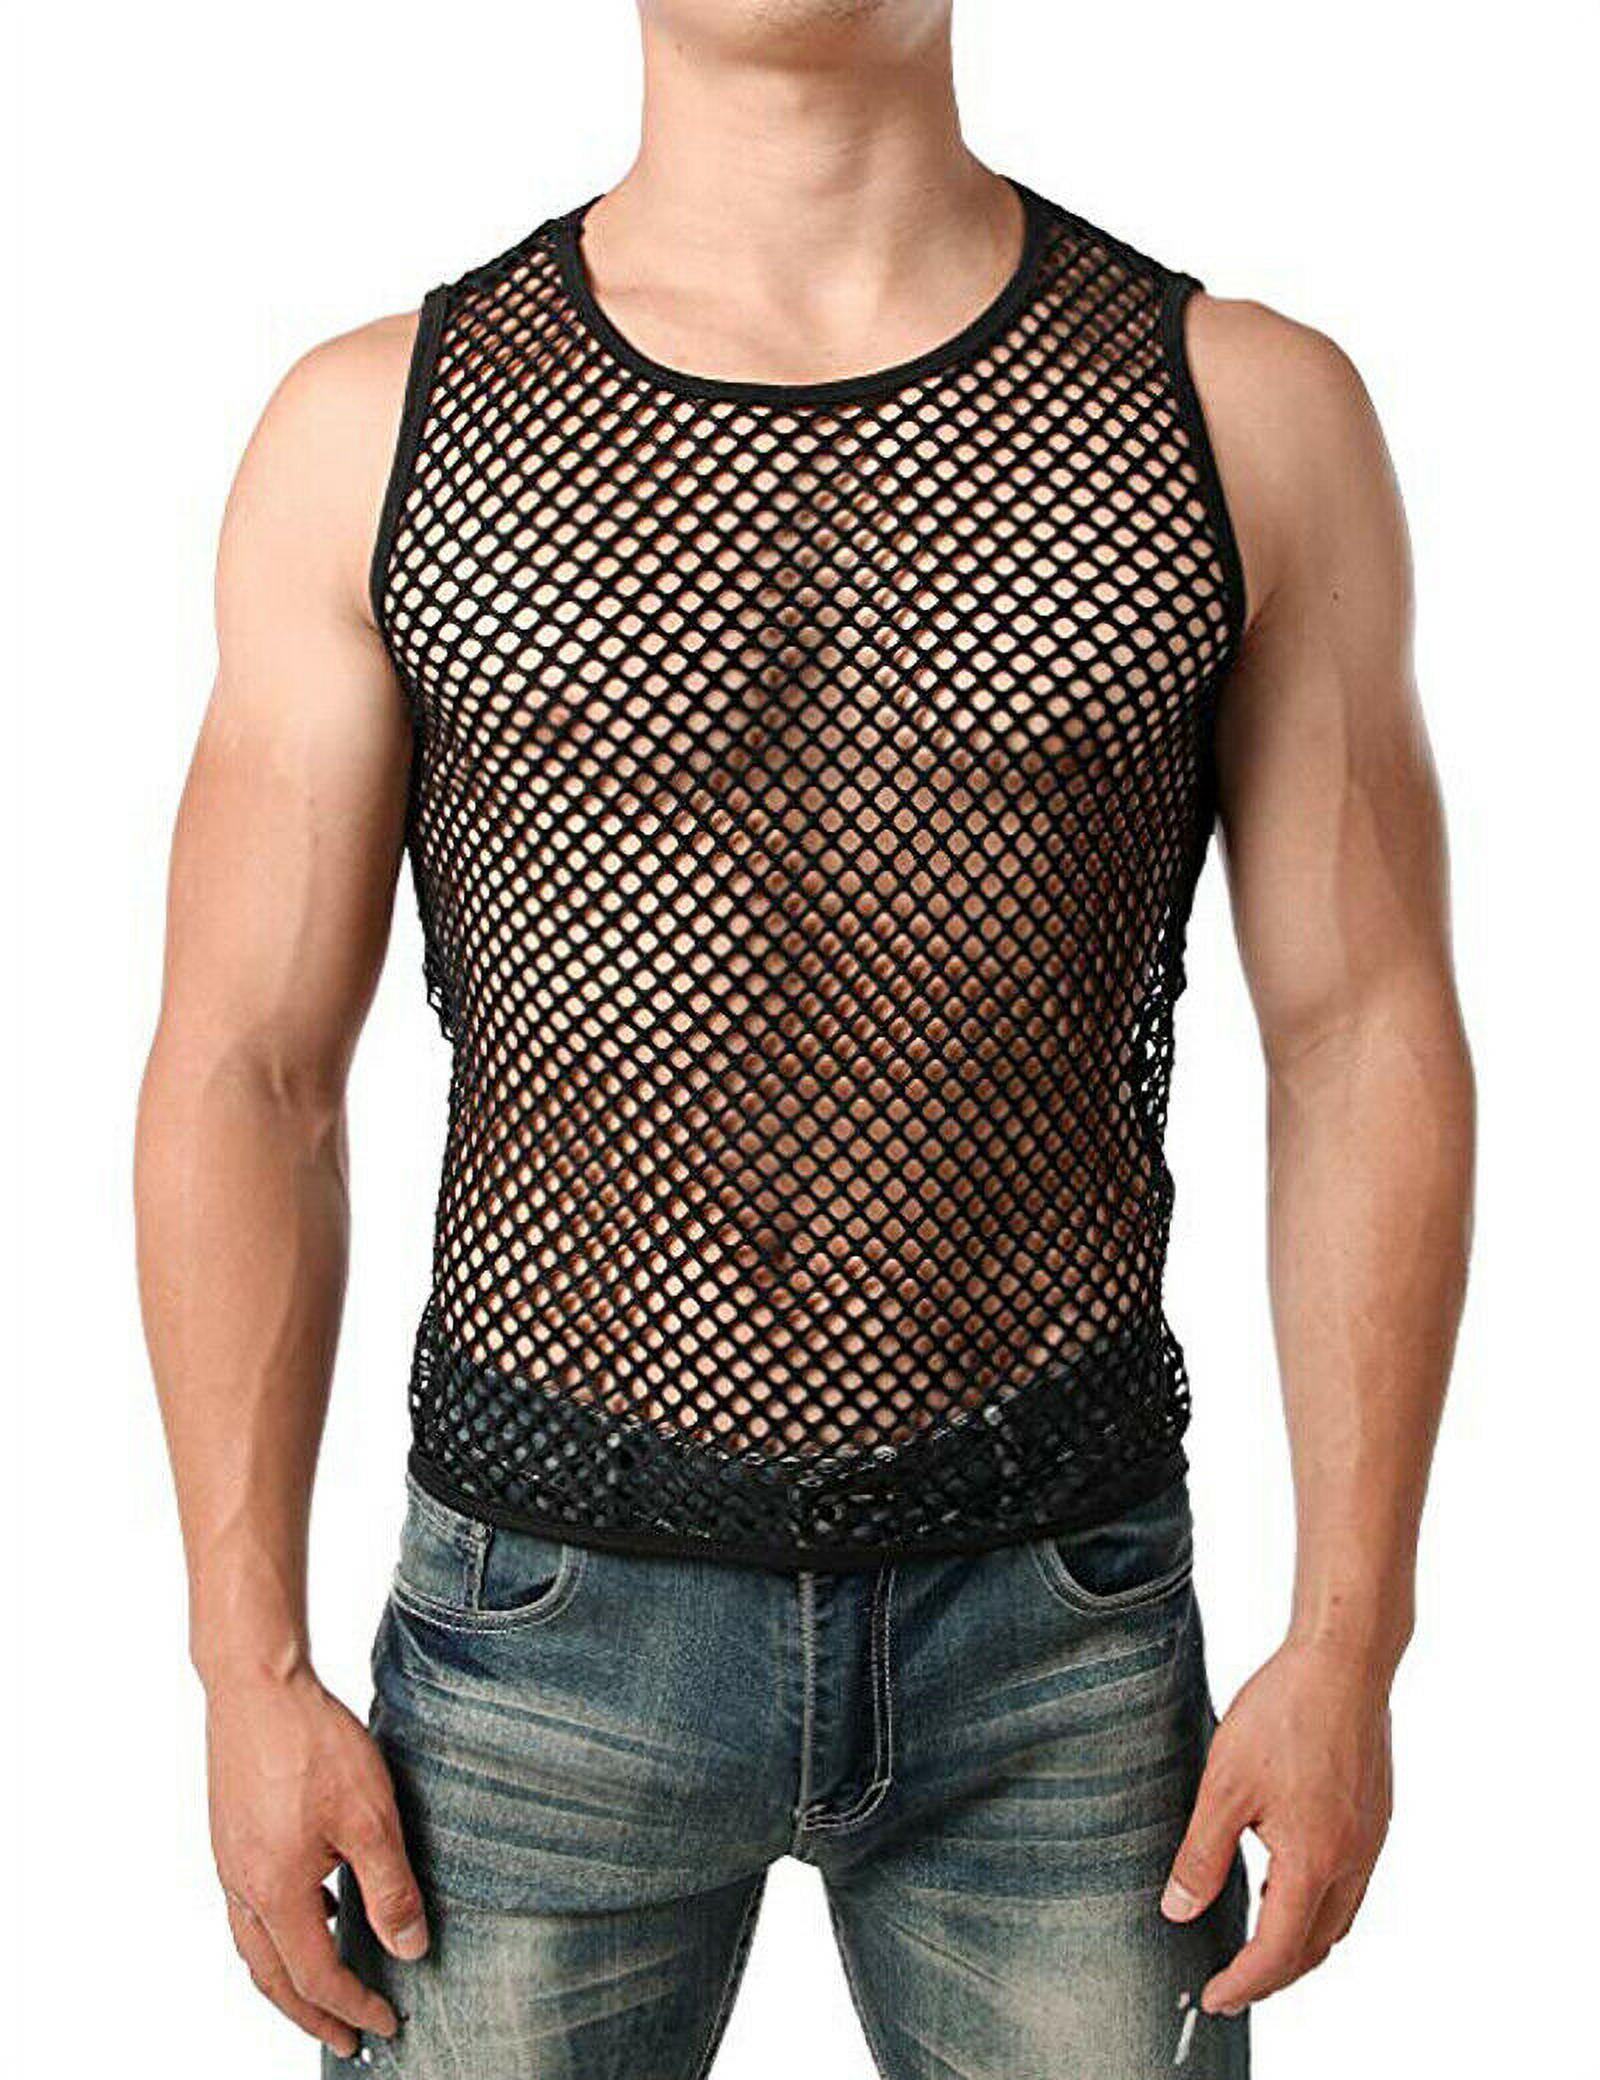 quick-delivery-us-men-long-sleeve-mesh-see-through-top-t-shirt-fishnet-muscle-tank-vest-top-hot